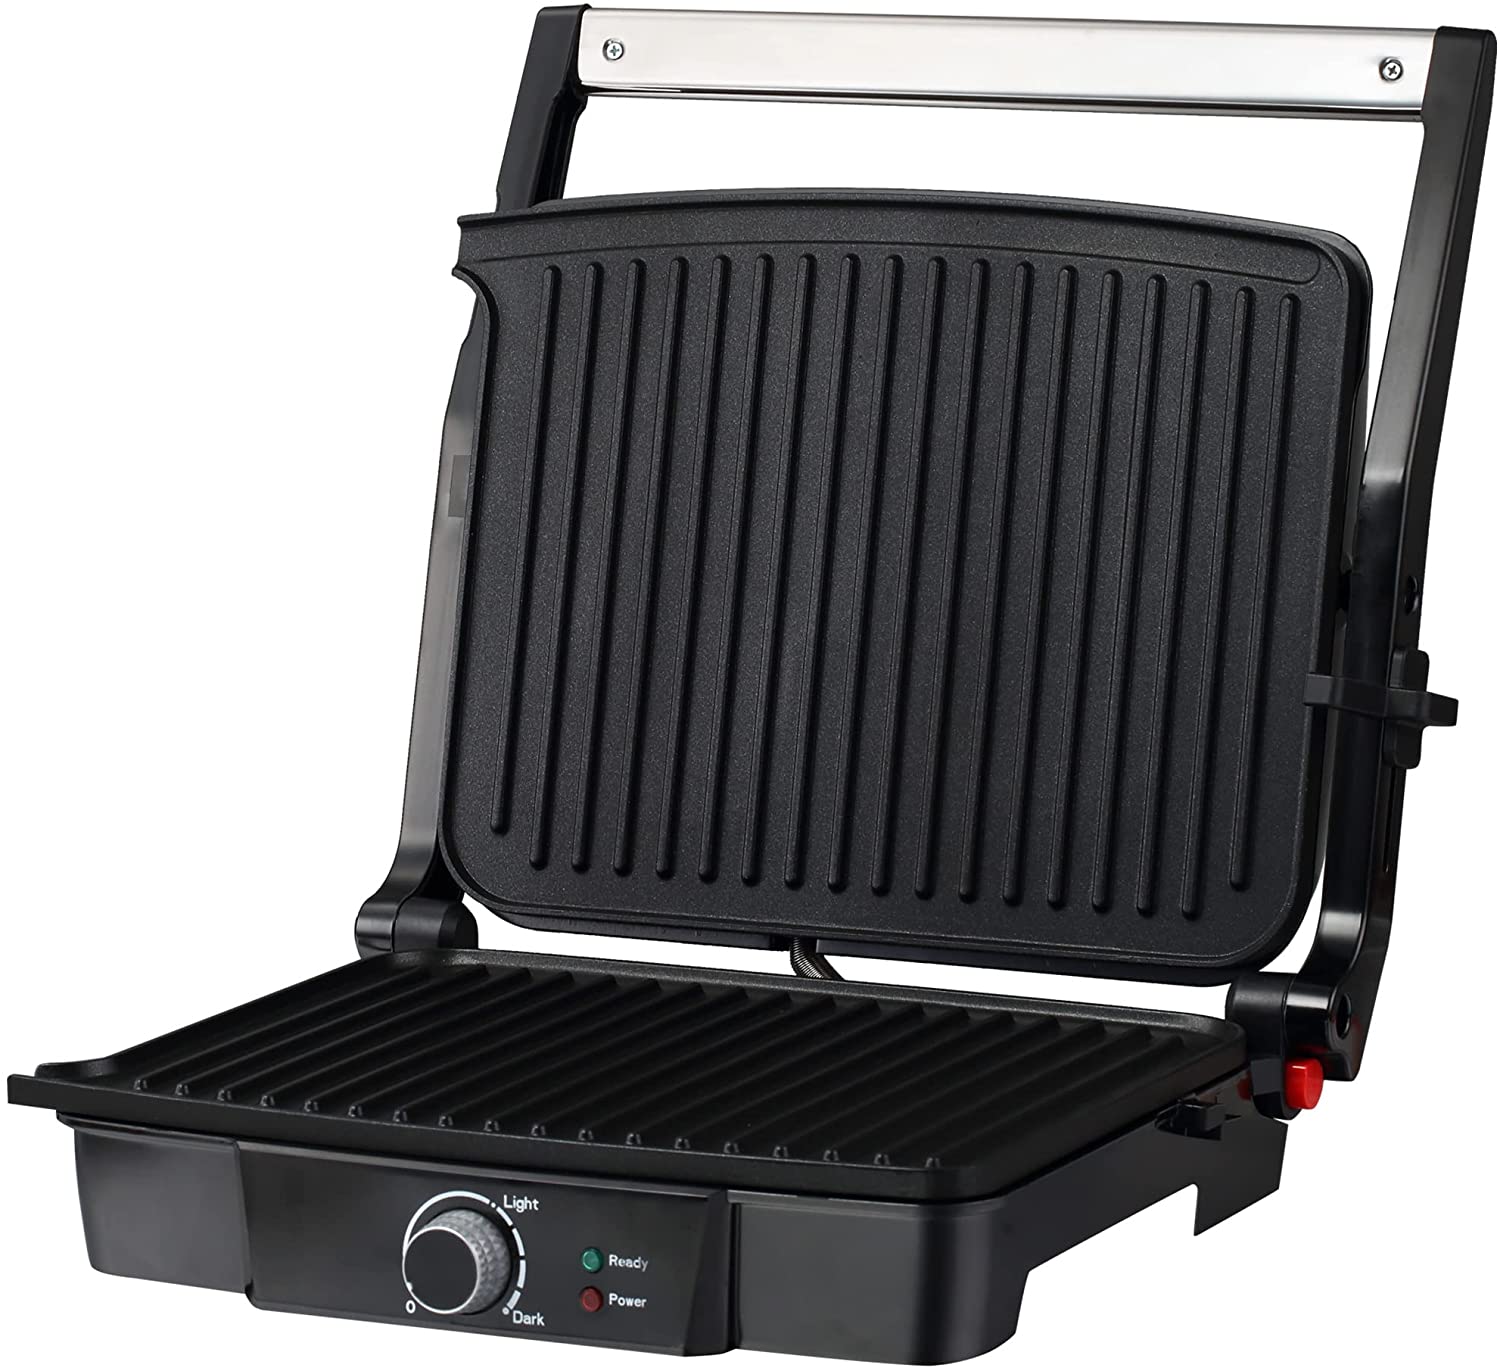 HOMCOM Contact Grill Electric Grill for Sandwiches Toasts Steak Panini 2000